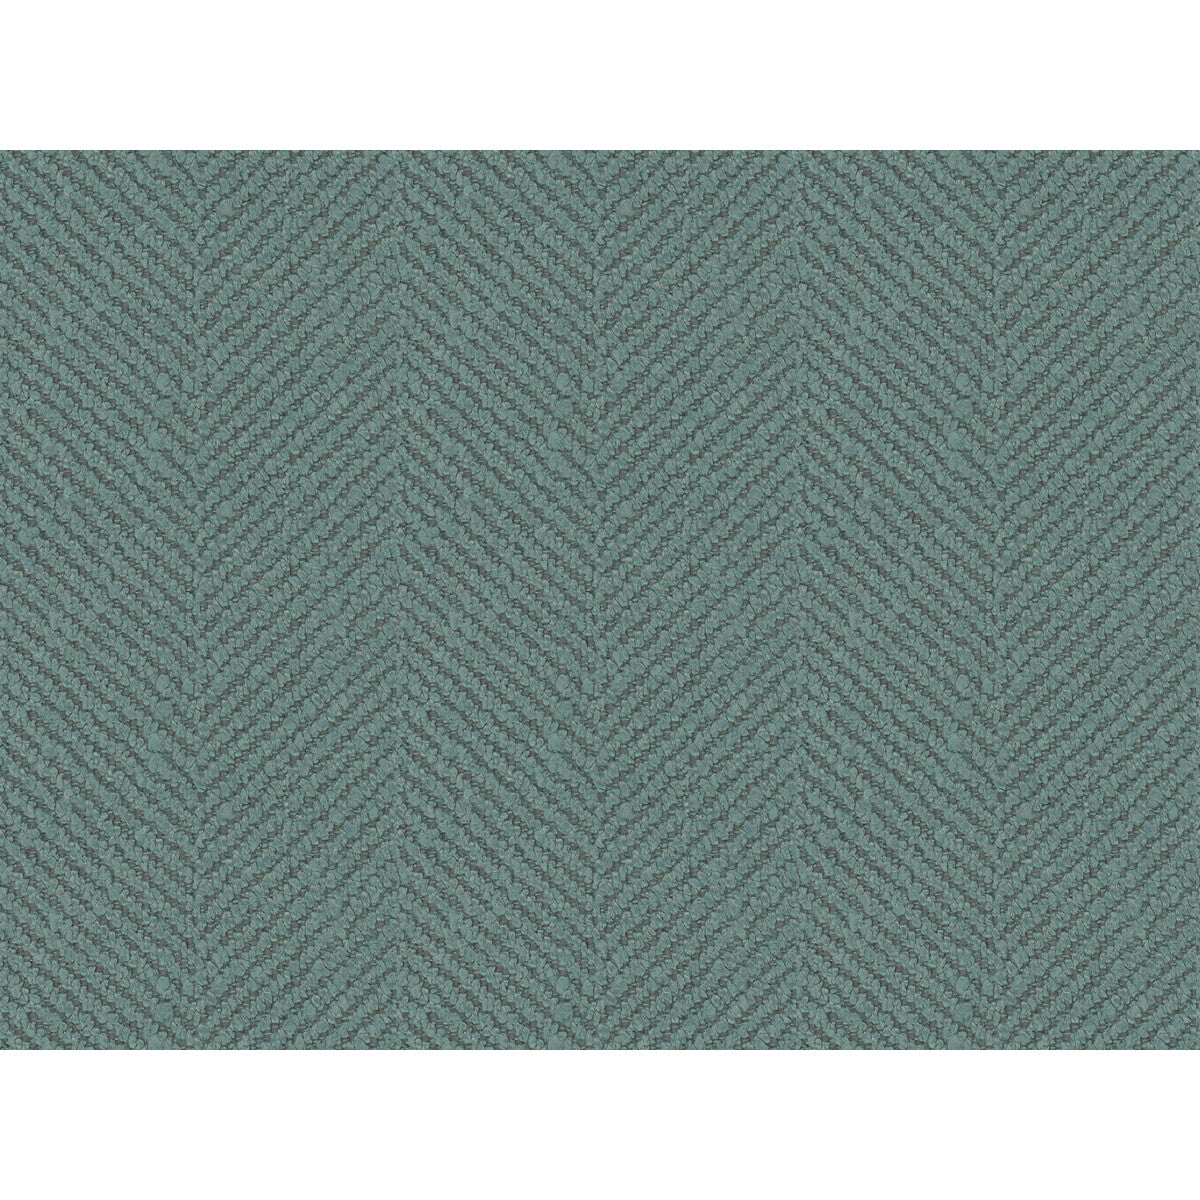 Kravet Smart fabric in 34631-13 color - pattern 34631.13.0 - by Kravet Smart in the Performance Crypton Home collection